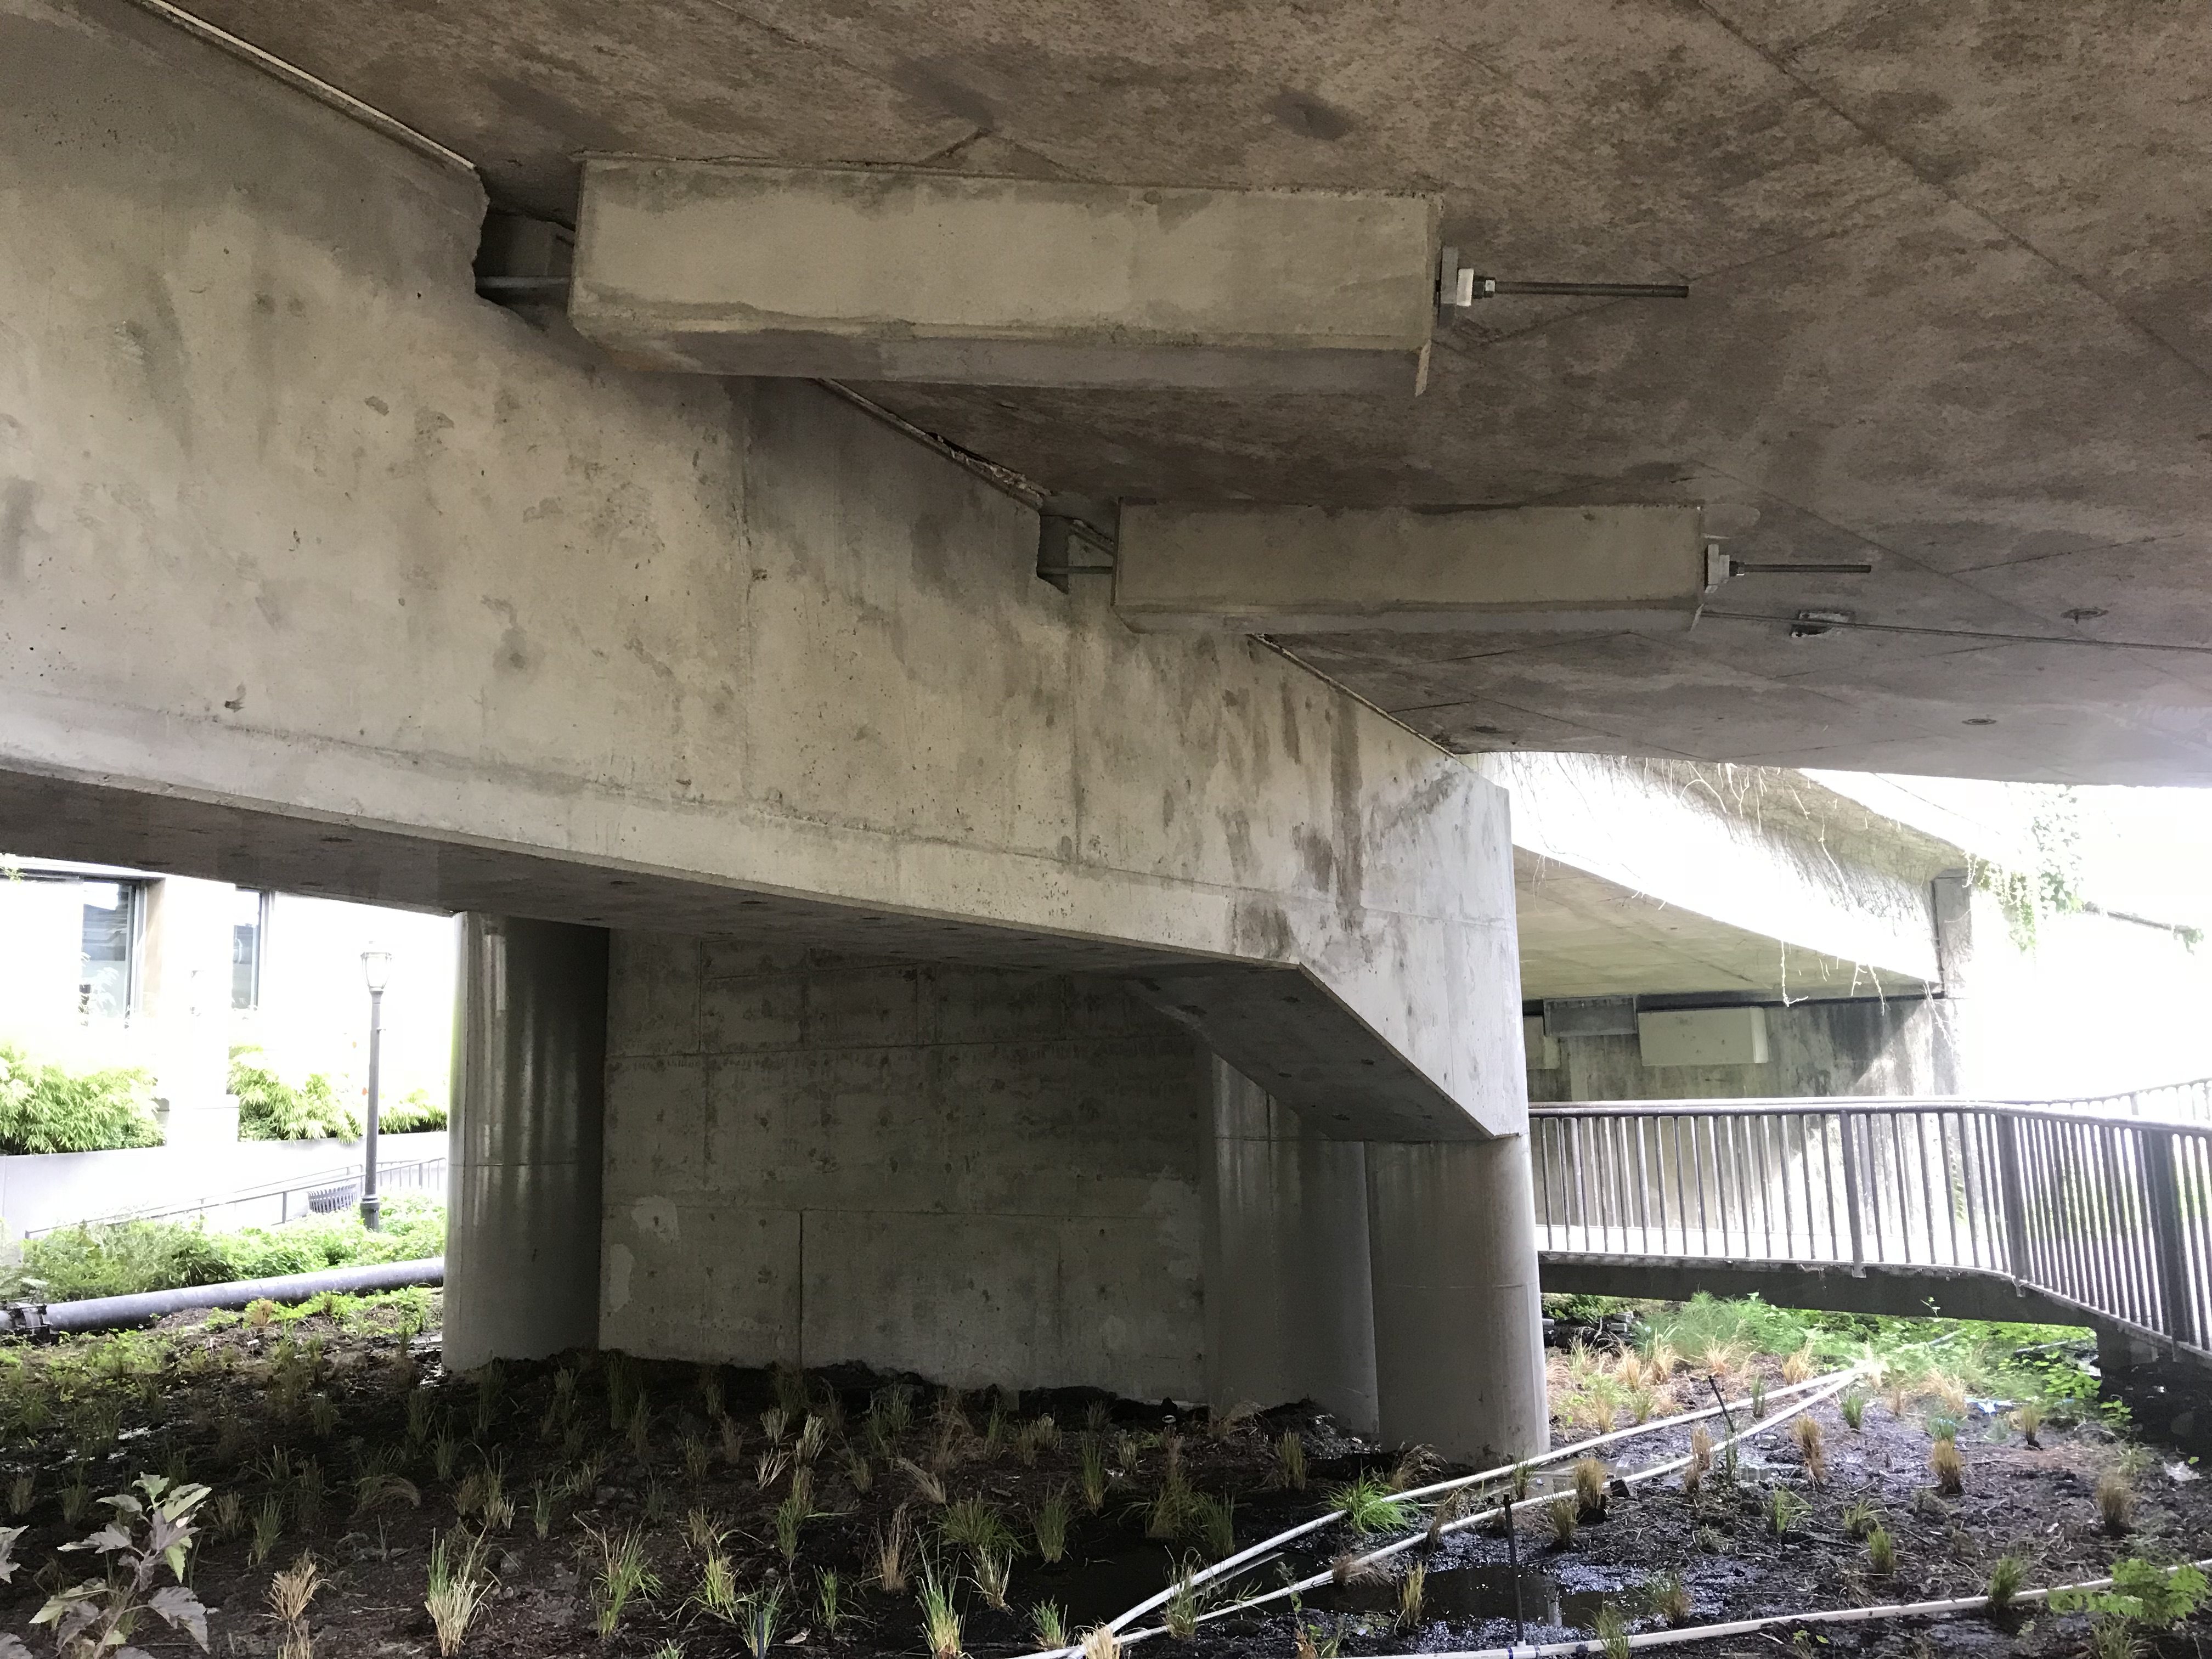 Underneath the east approach of the NE 45th St Viaduct